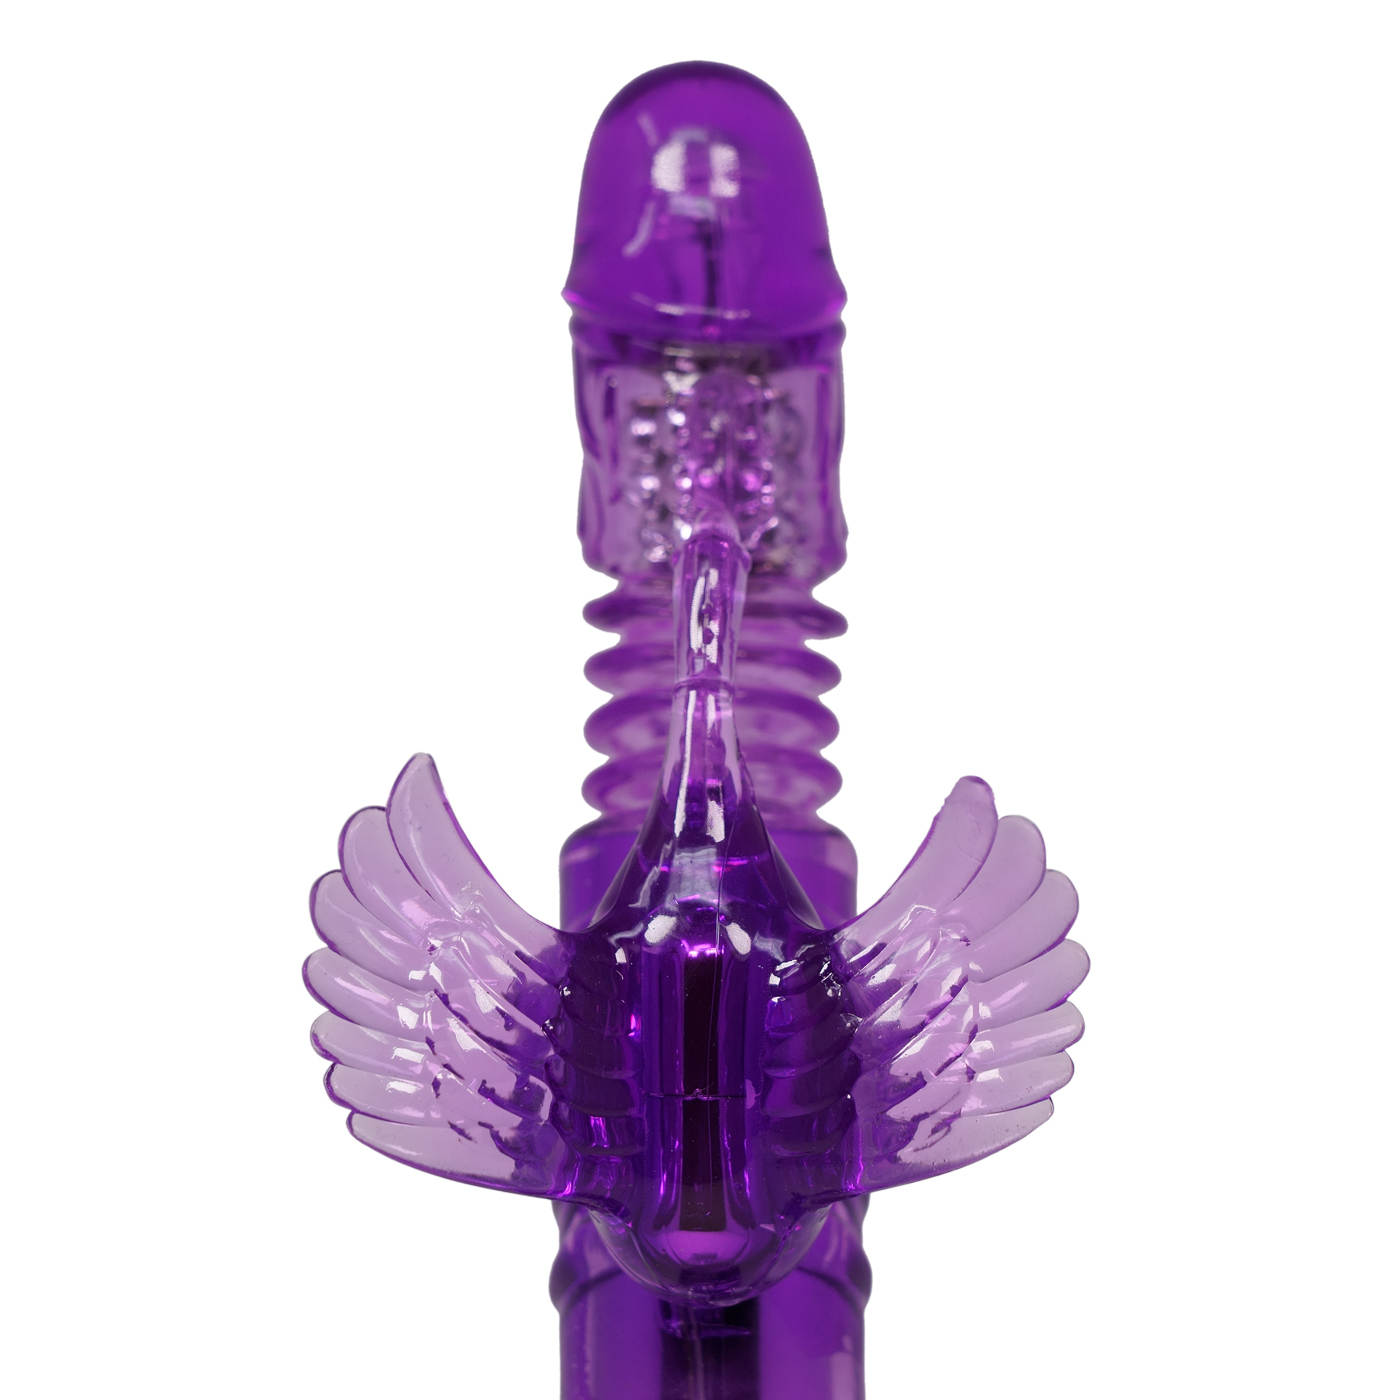 Double Delight 8 Function Thrusting Rabbit Vibrator With Rotating Beads